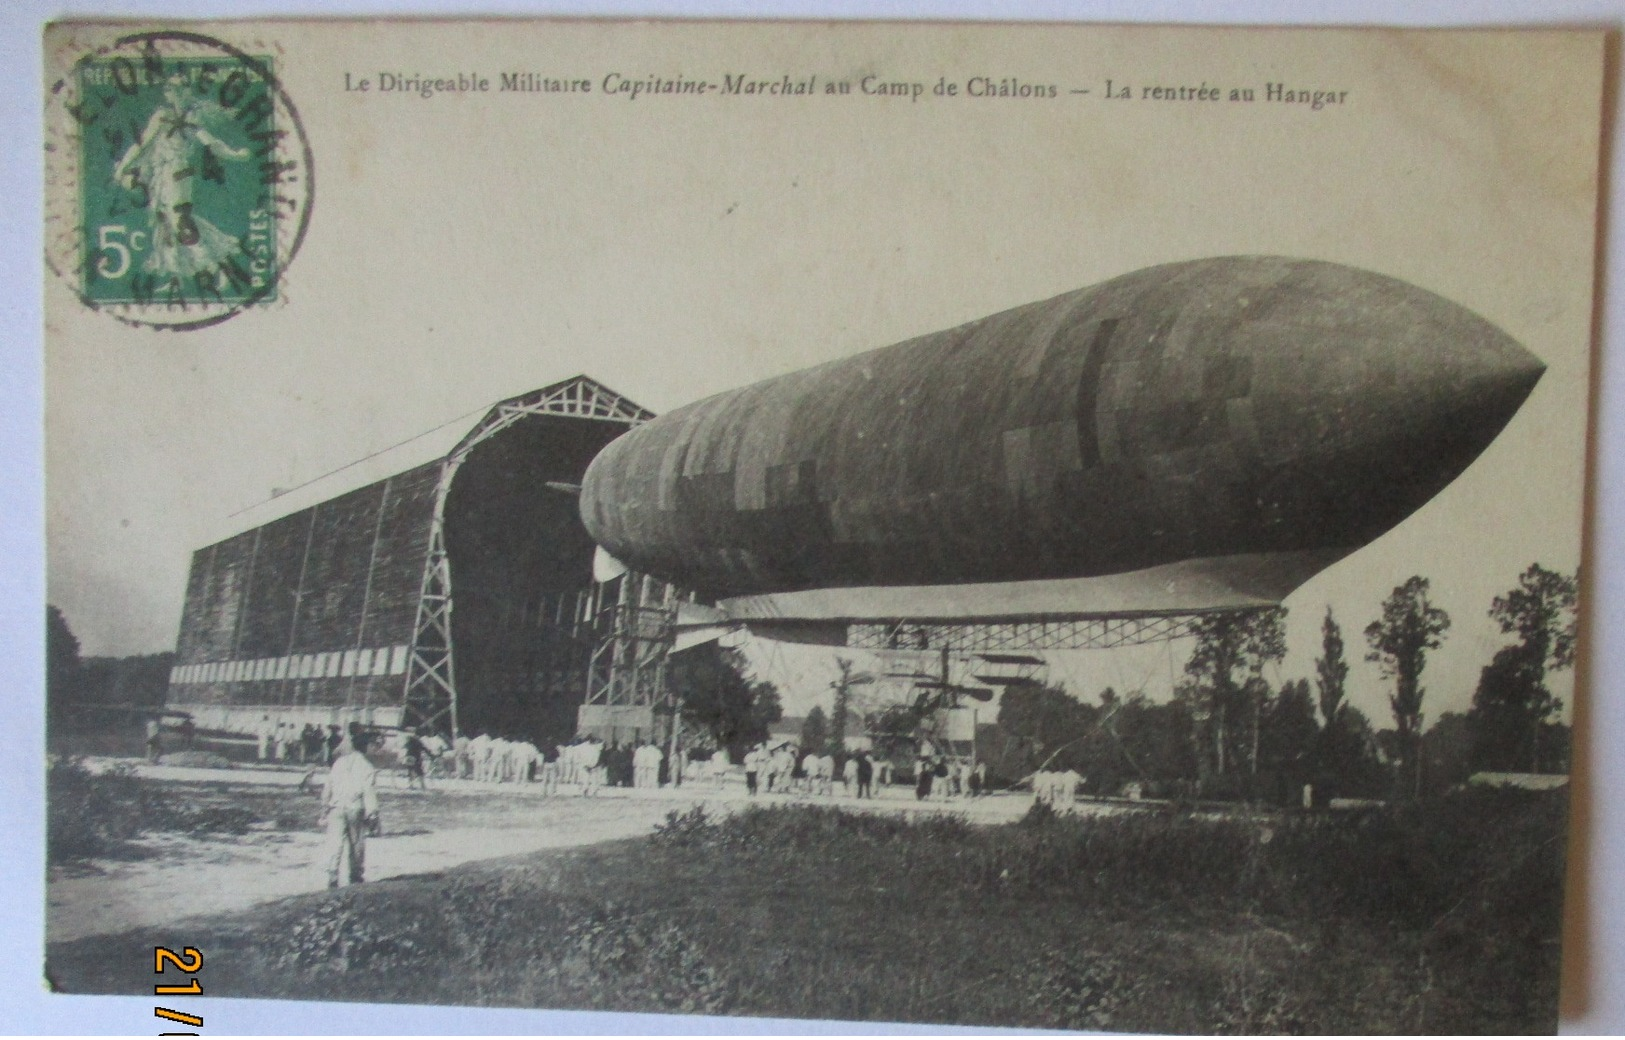 Frankreich Chalons, Militaire Dirigeable Captaine-Marchal 1913 (43869) - Oorlog 1914-18